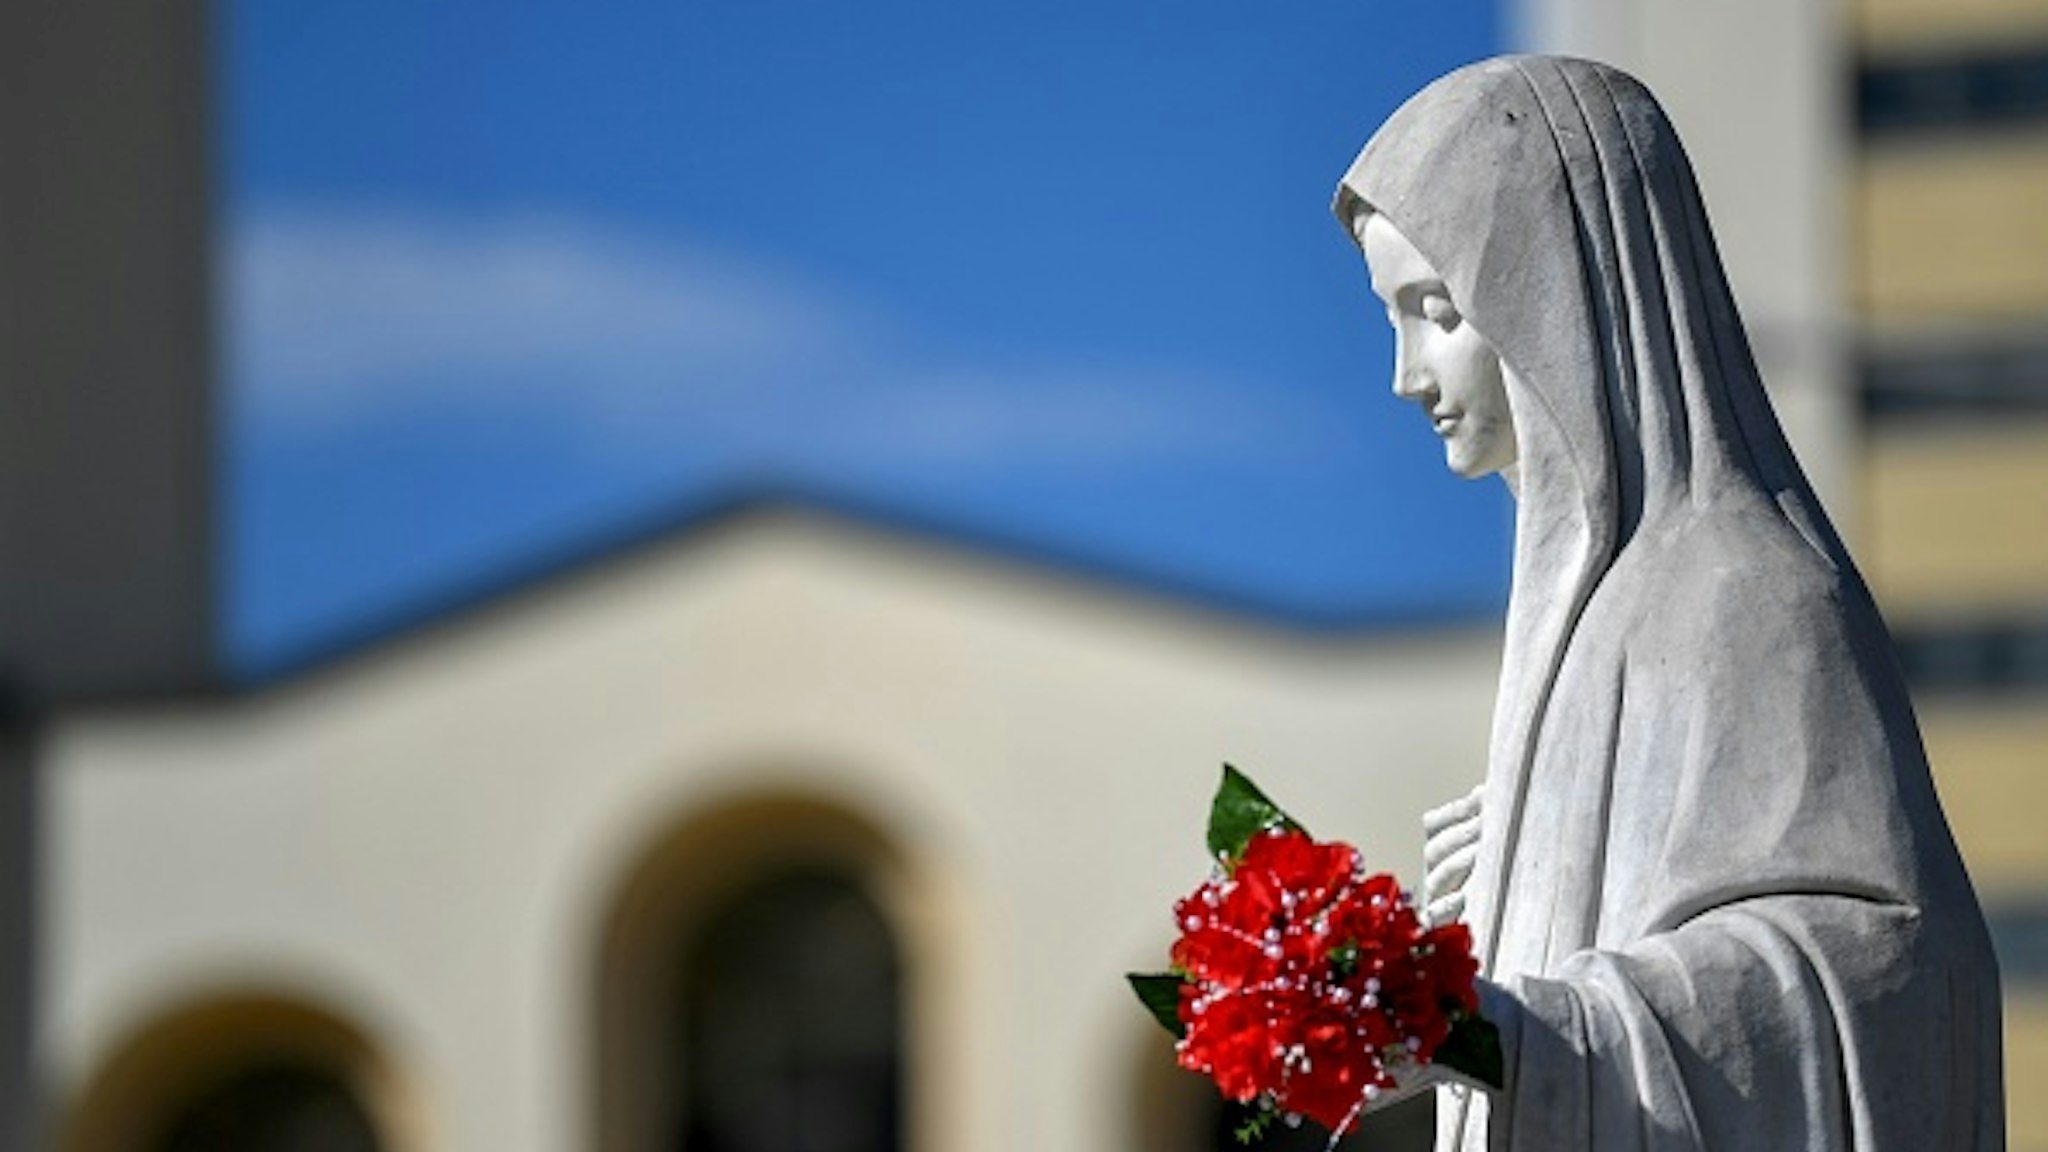 This picture taken on June 26, 2019 shows a statue of Virgin Marry, in front of Franciscan church of St. Jacob, in Southern-Bosnian village of Medjugorje. - The Bosnian town of Medjugorje has become an unofficial site of Catholic pilgrimage since the supposed apparition of Virgin Mary in front of children on a nearby hill, 38 years ago. According to some of the pilgrims, Medjugorje is as sacred as Lourdes or Fatima.